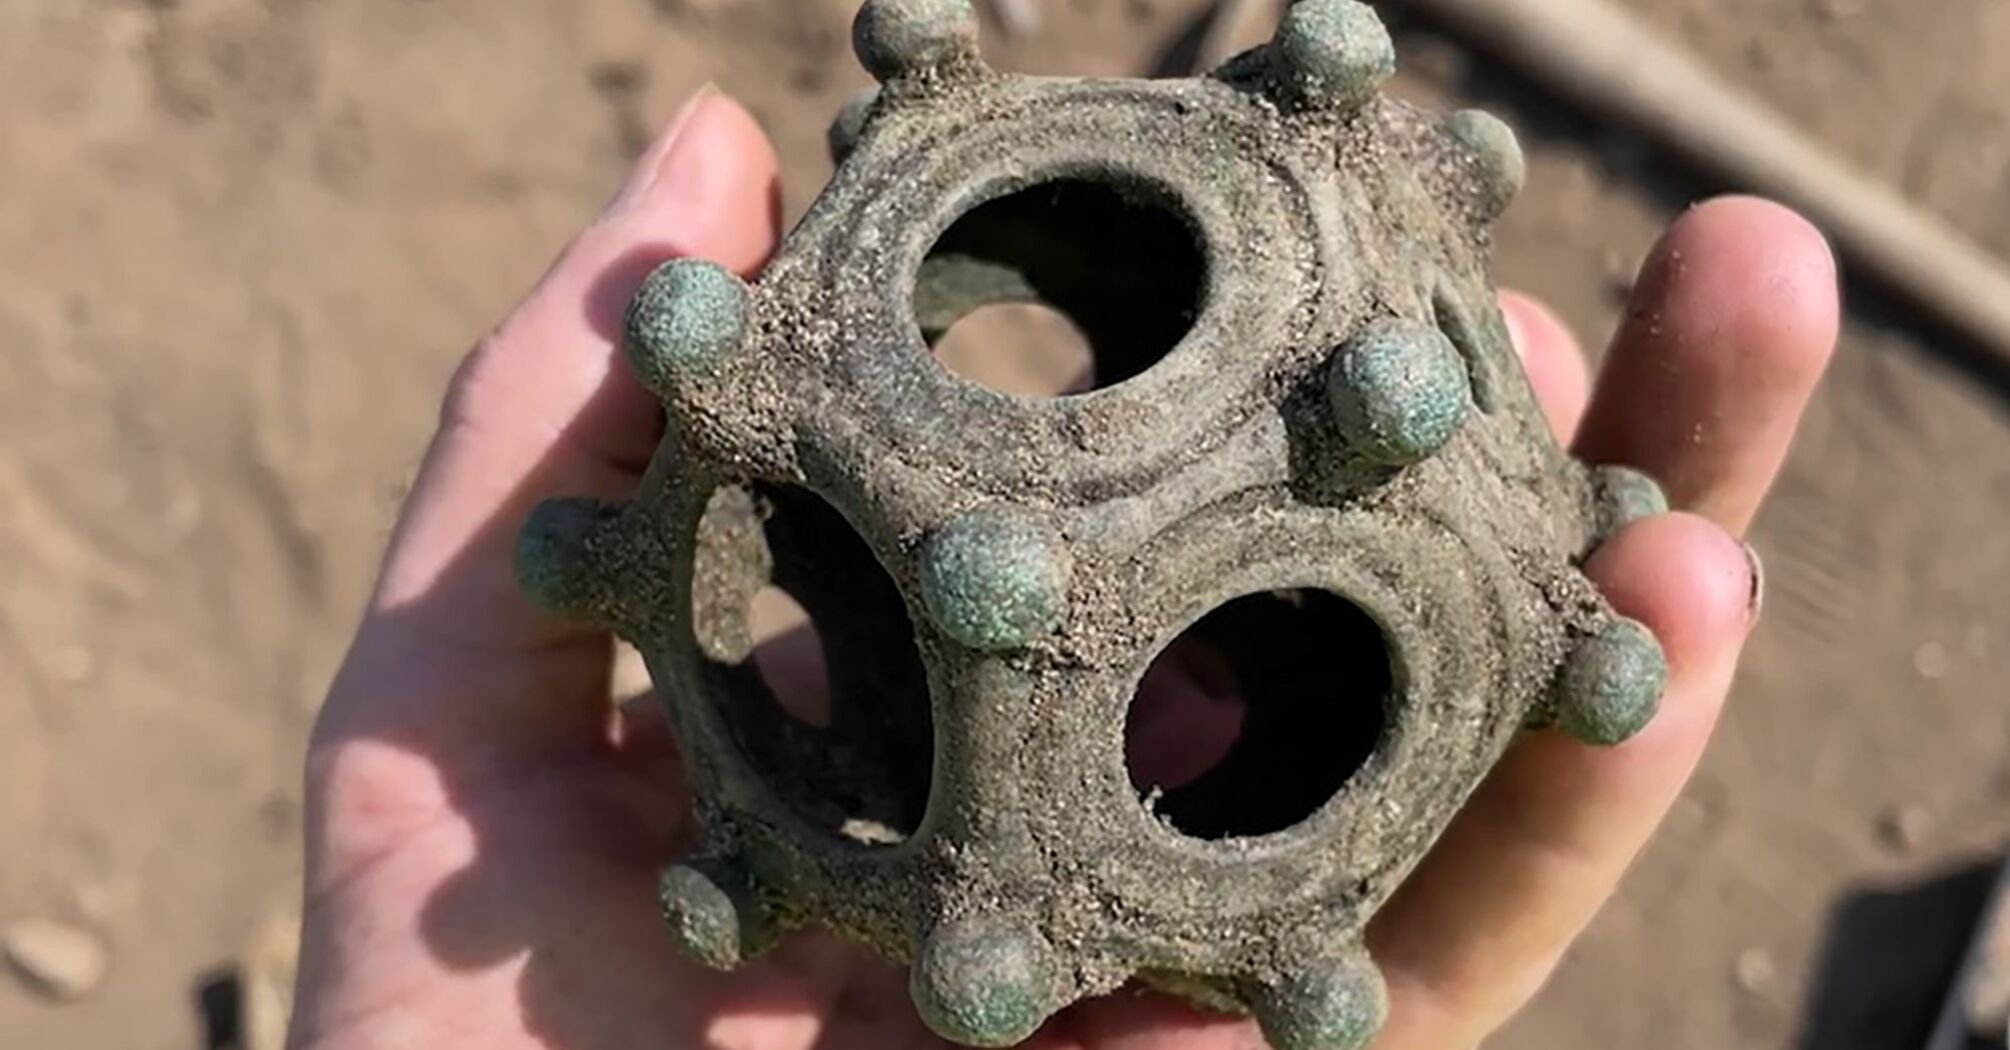 Roman object discovered in England